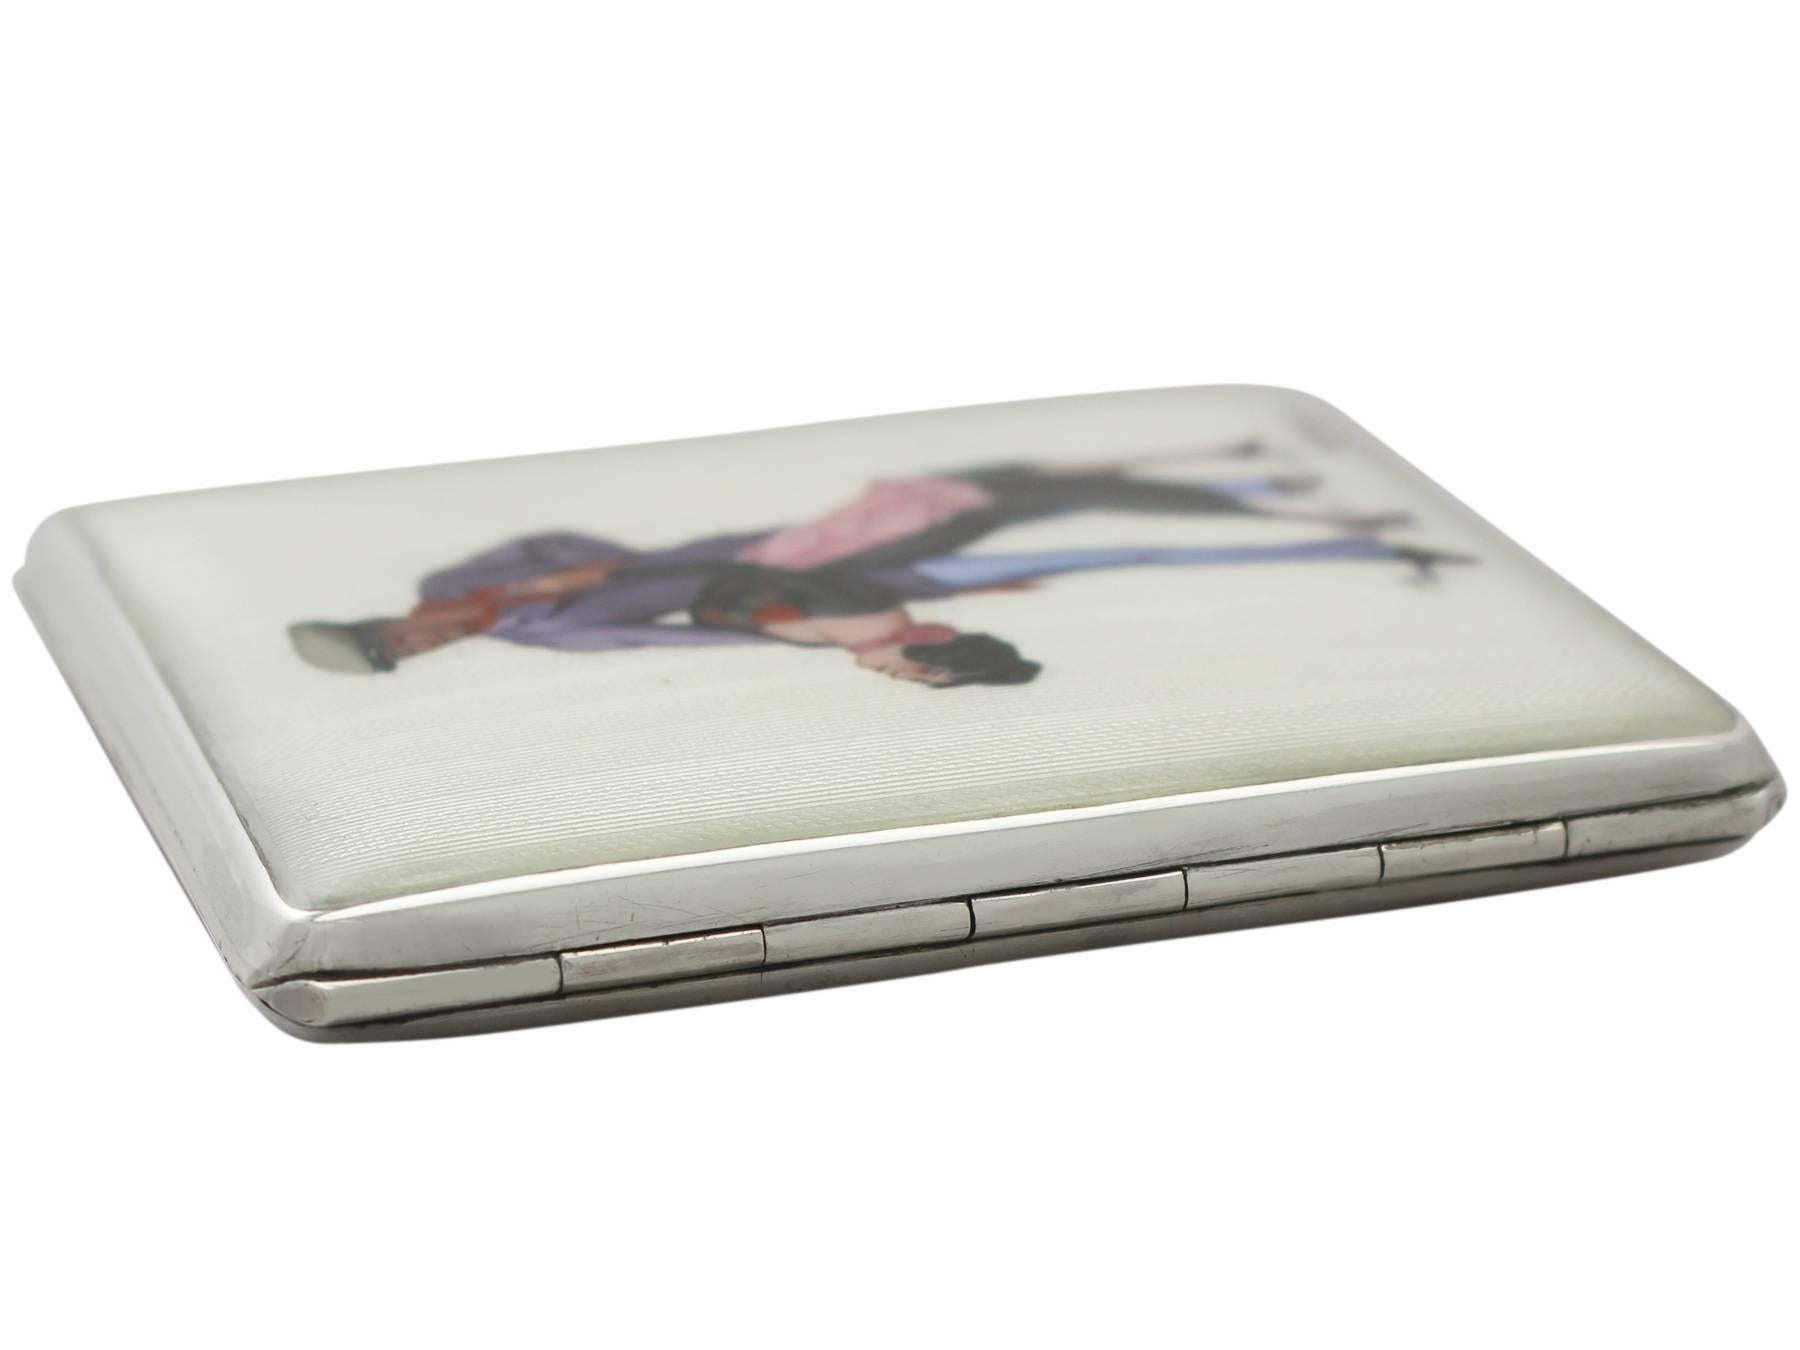 A fine antique Austrian silver and enamel cigarette / card case; part of our continental silverware collection

This fine antique Austrian silver and enamel cigarette case has a rectangular plain shaped form.

The anterior cover is embellished